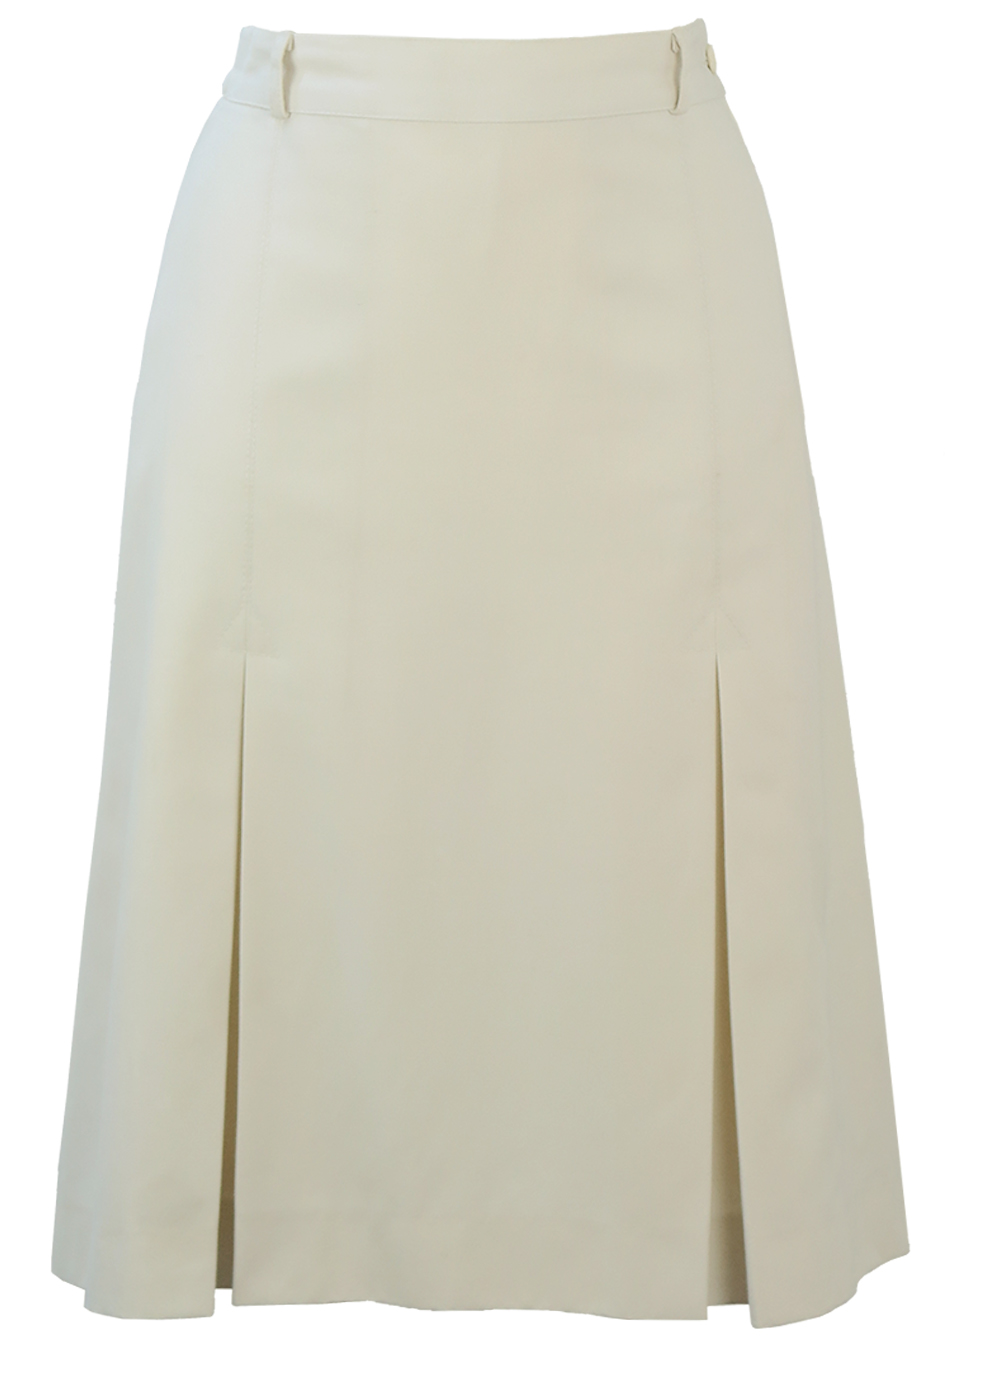 Vintage 70's White Knee Length Skirt with Inverted Pleats - S | Reign ...